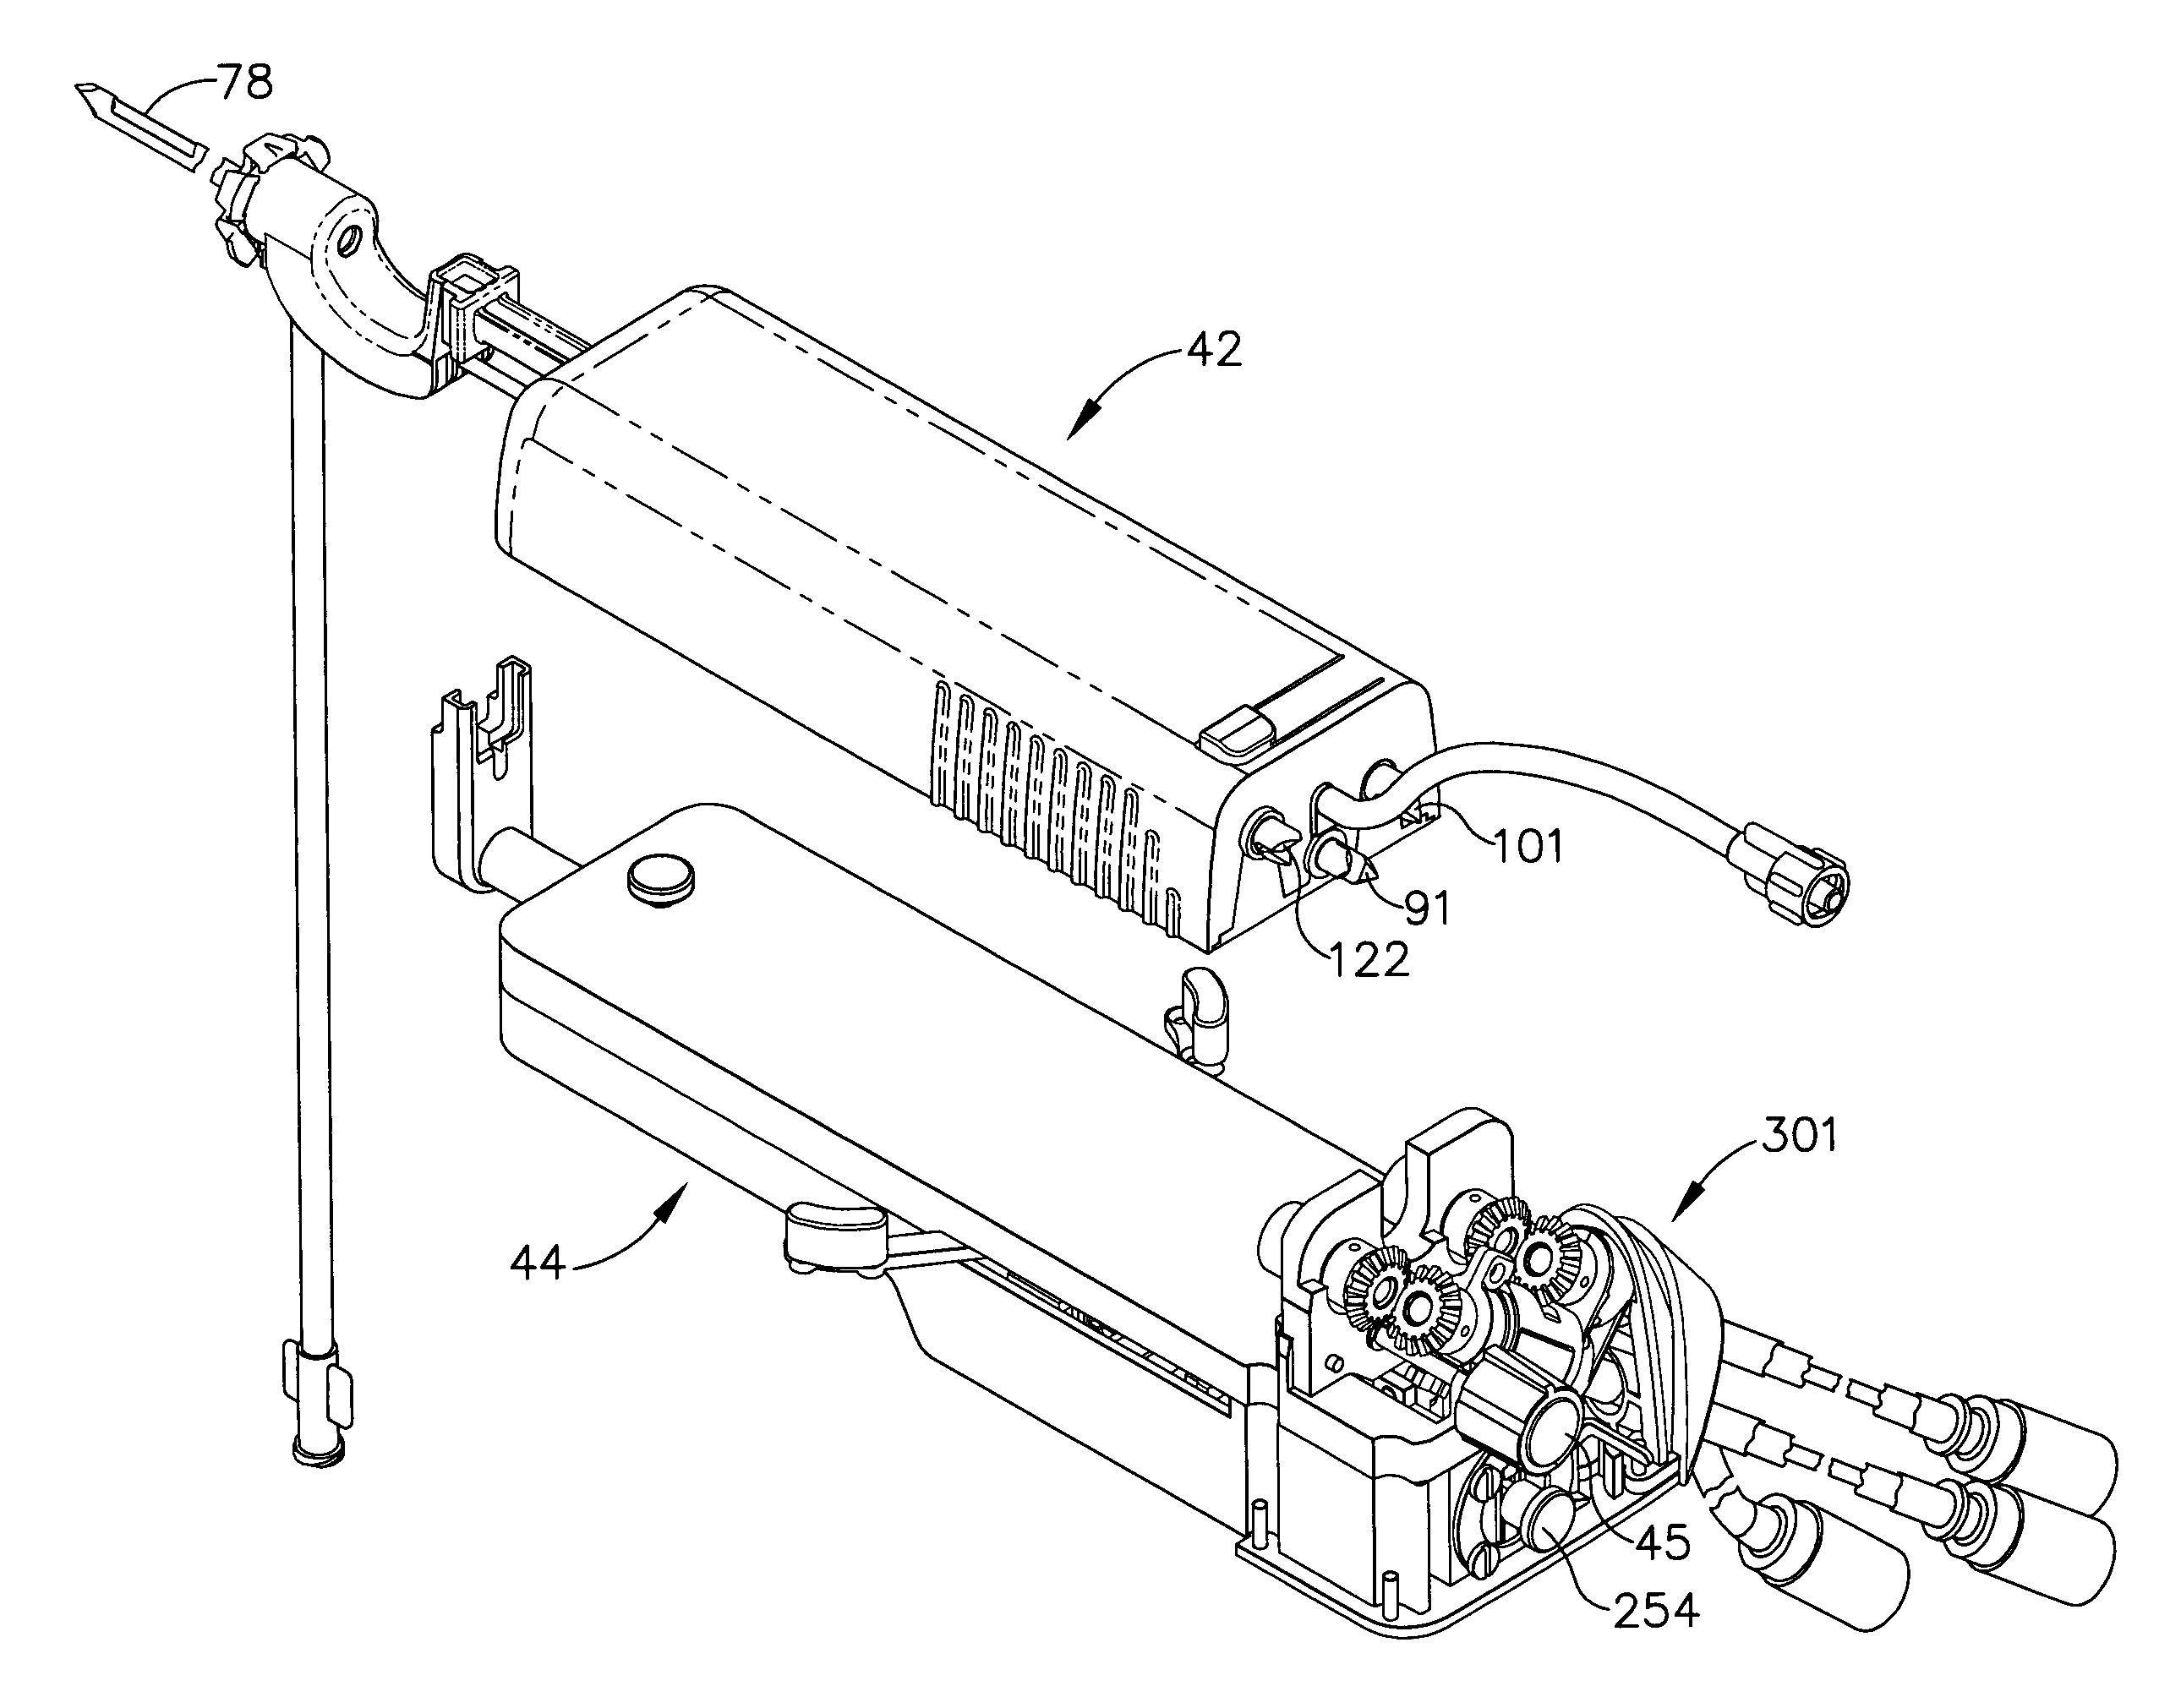 Remote thumbwheel for a surgical biopsy device